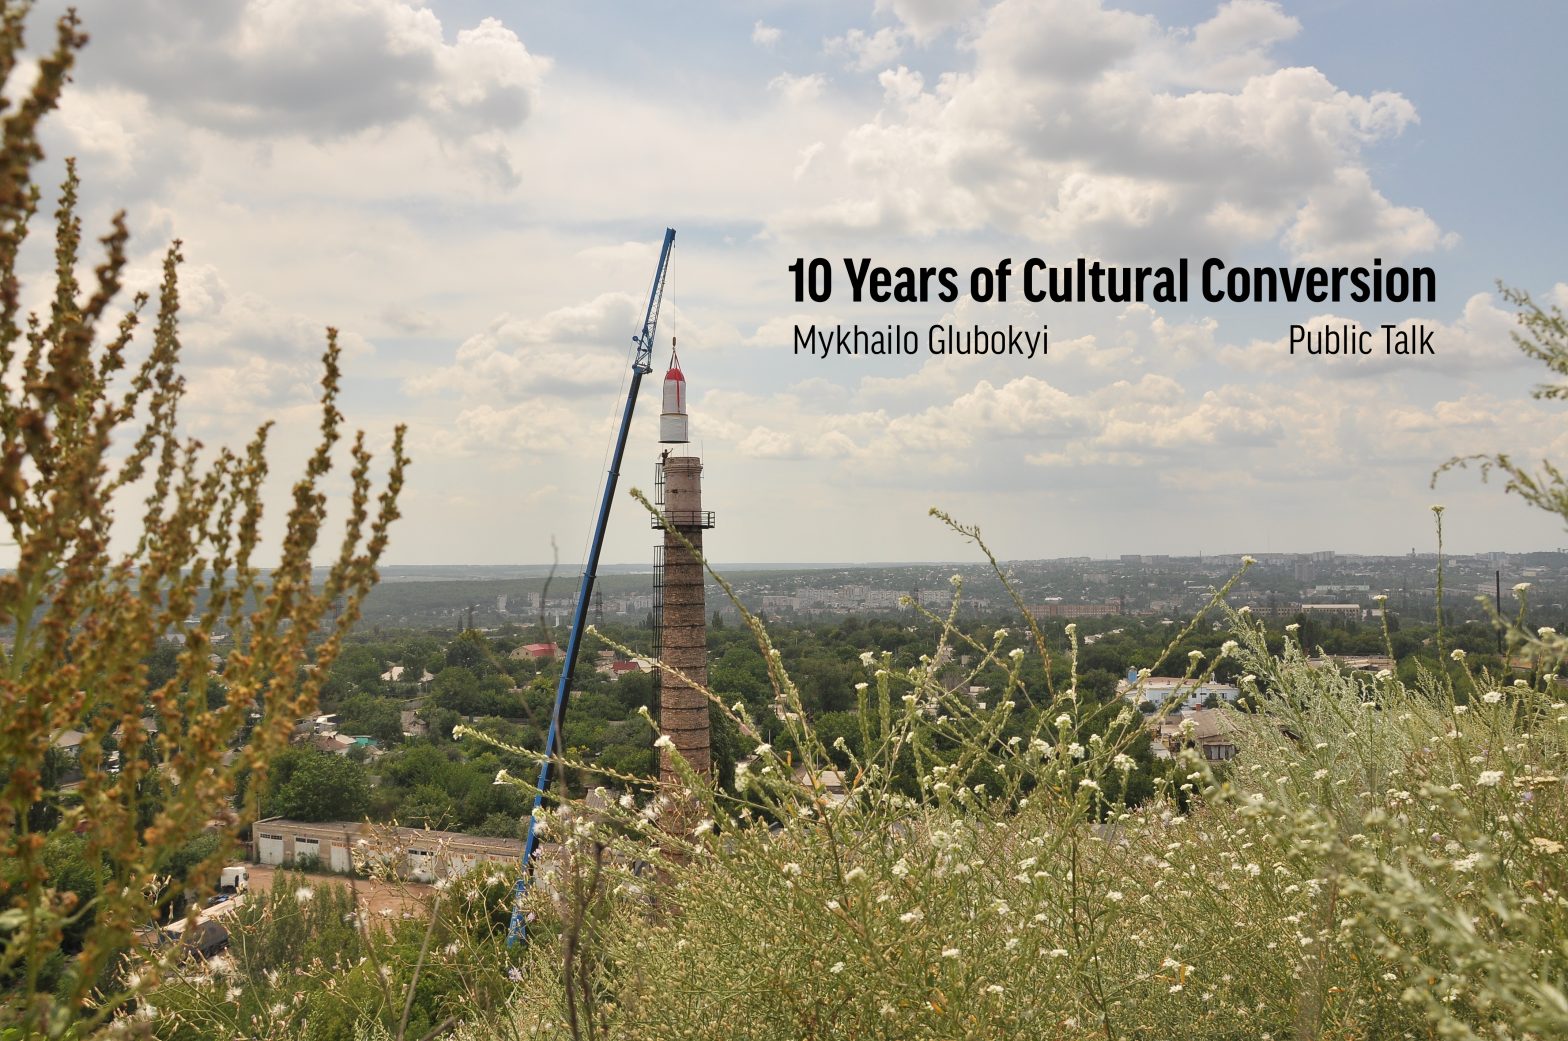 Mykhailo’s Talk – 10 Years of Cultural Conversion